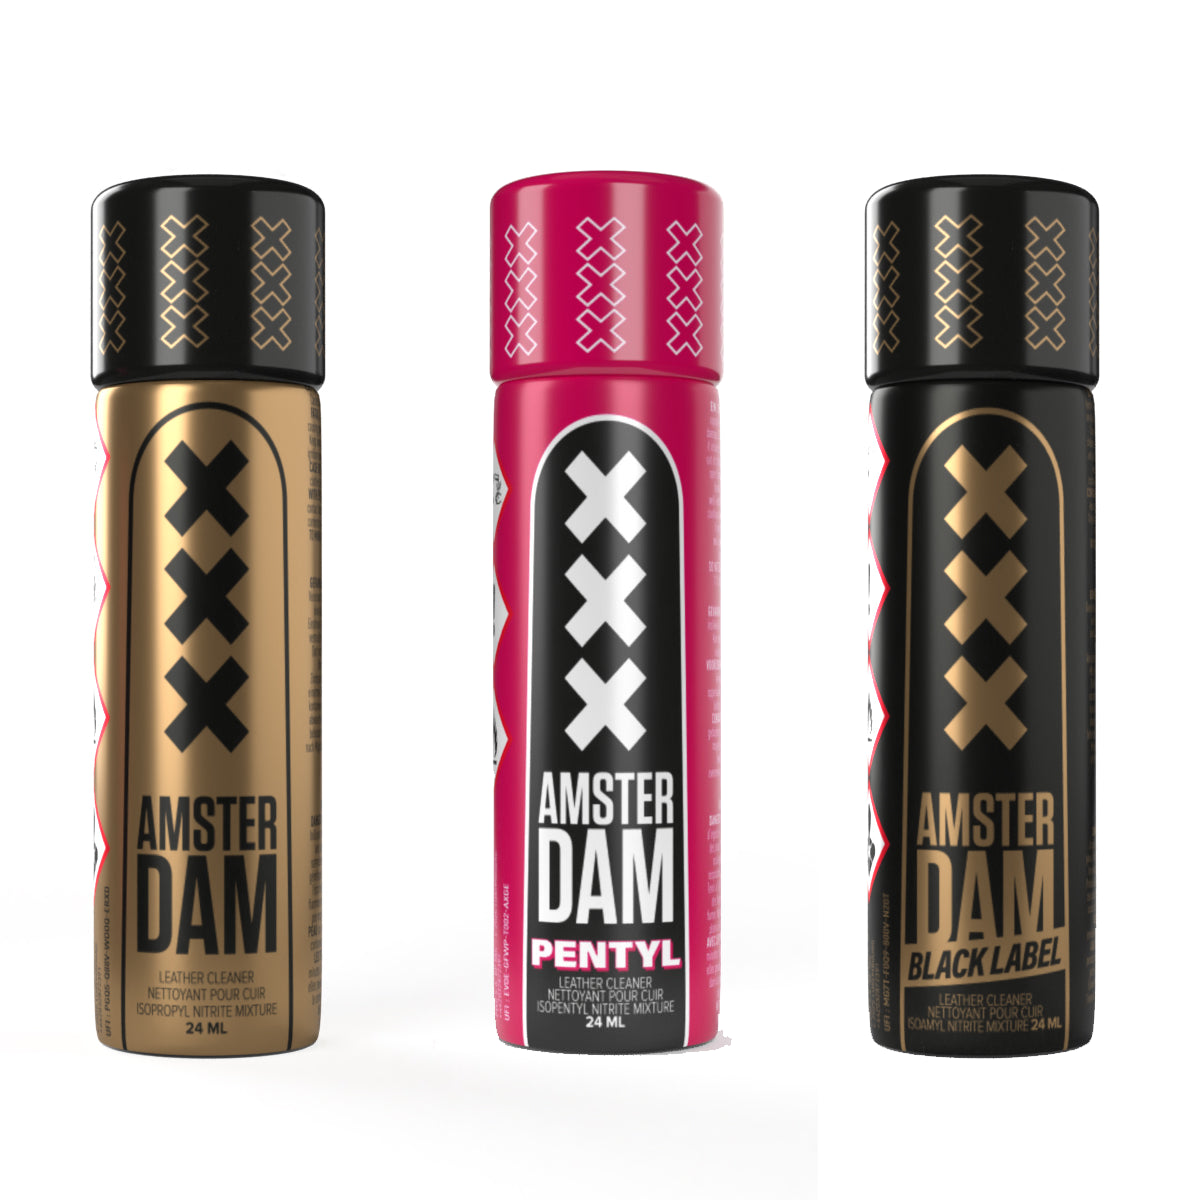 Amsterdam Slim Triple Pack, POPPERS UK, POPPERS USA, FREE DELIVERY, NEXT DAY DELIVERY